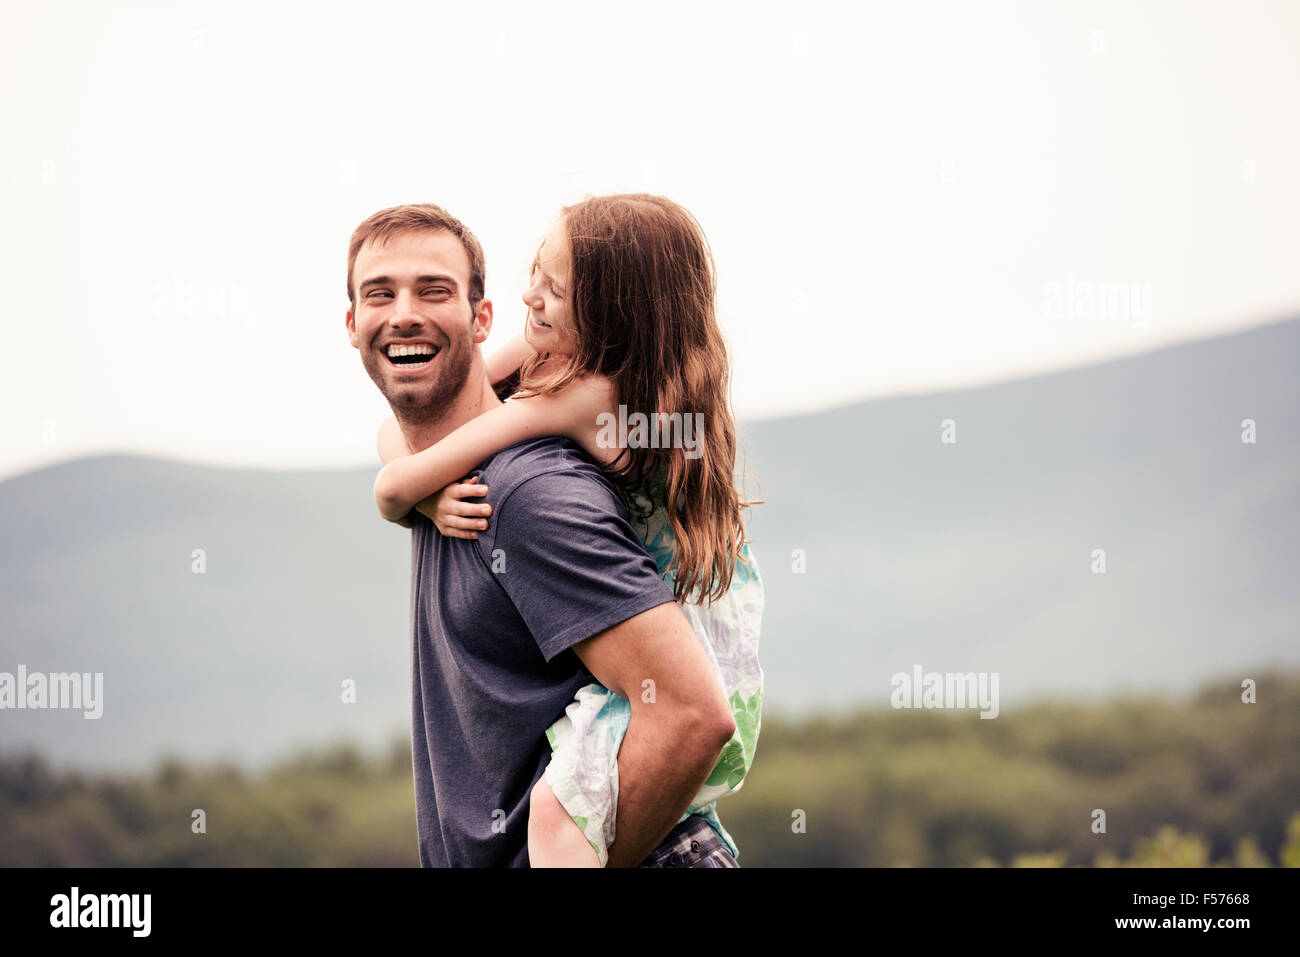 A man giving a young child a piggyback in a meadow. Stock Photo